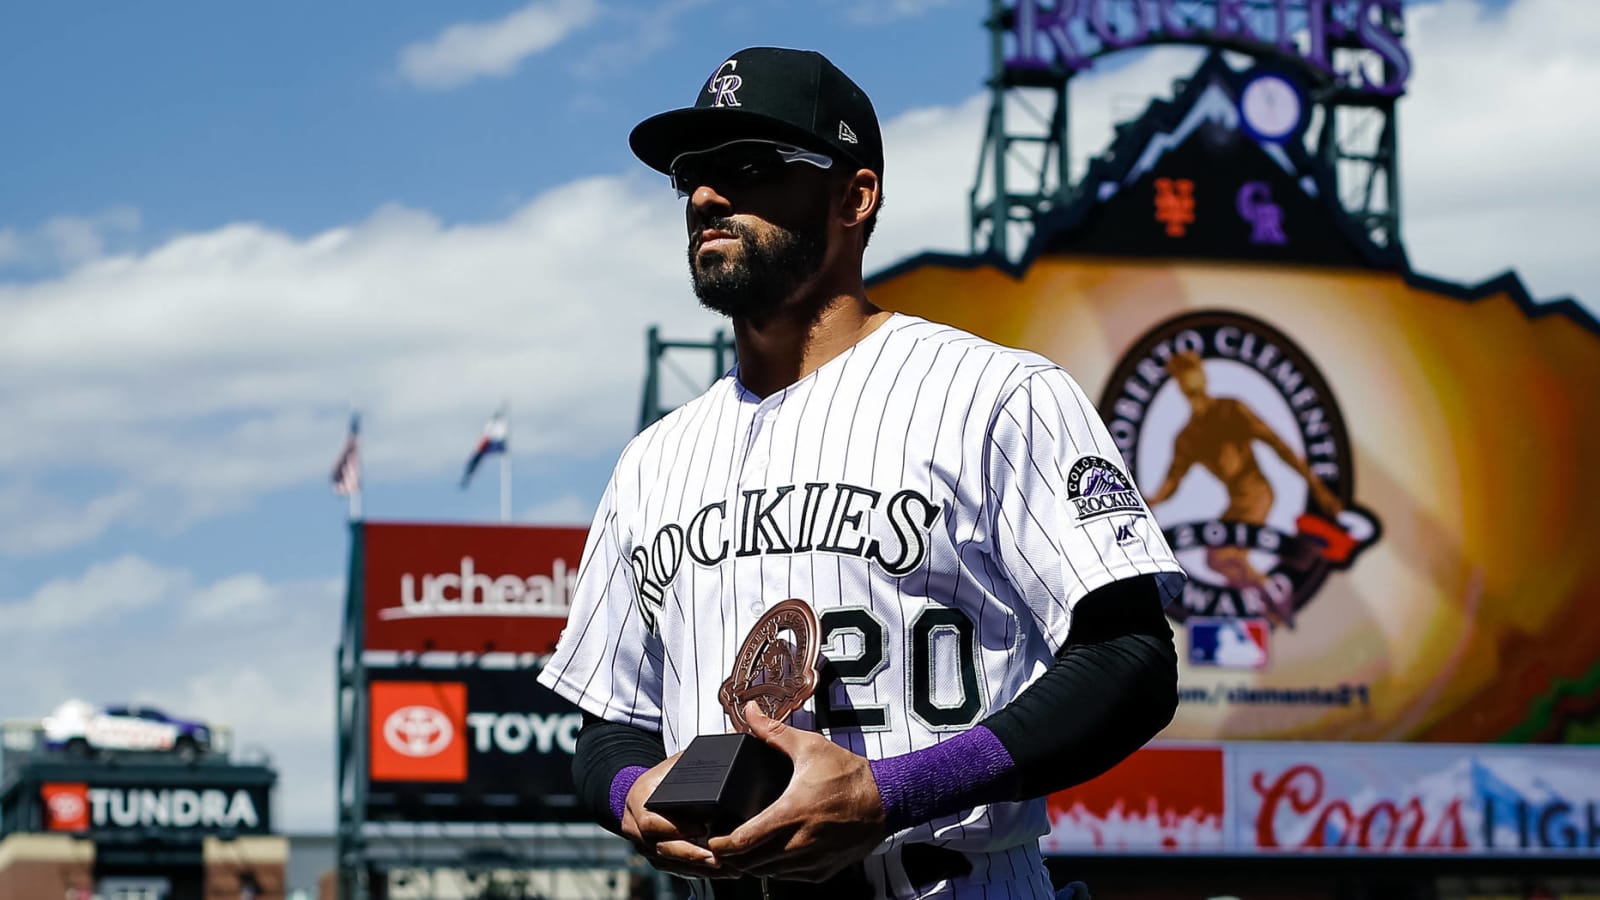 Rockies GM supports Ian Desmond's decision to opt out of 2020 MLB season